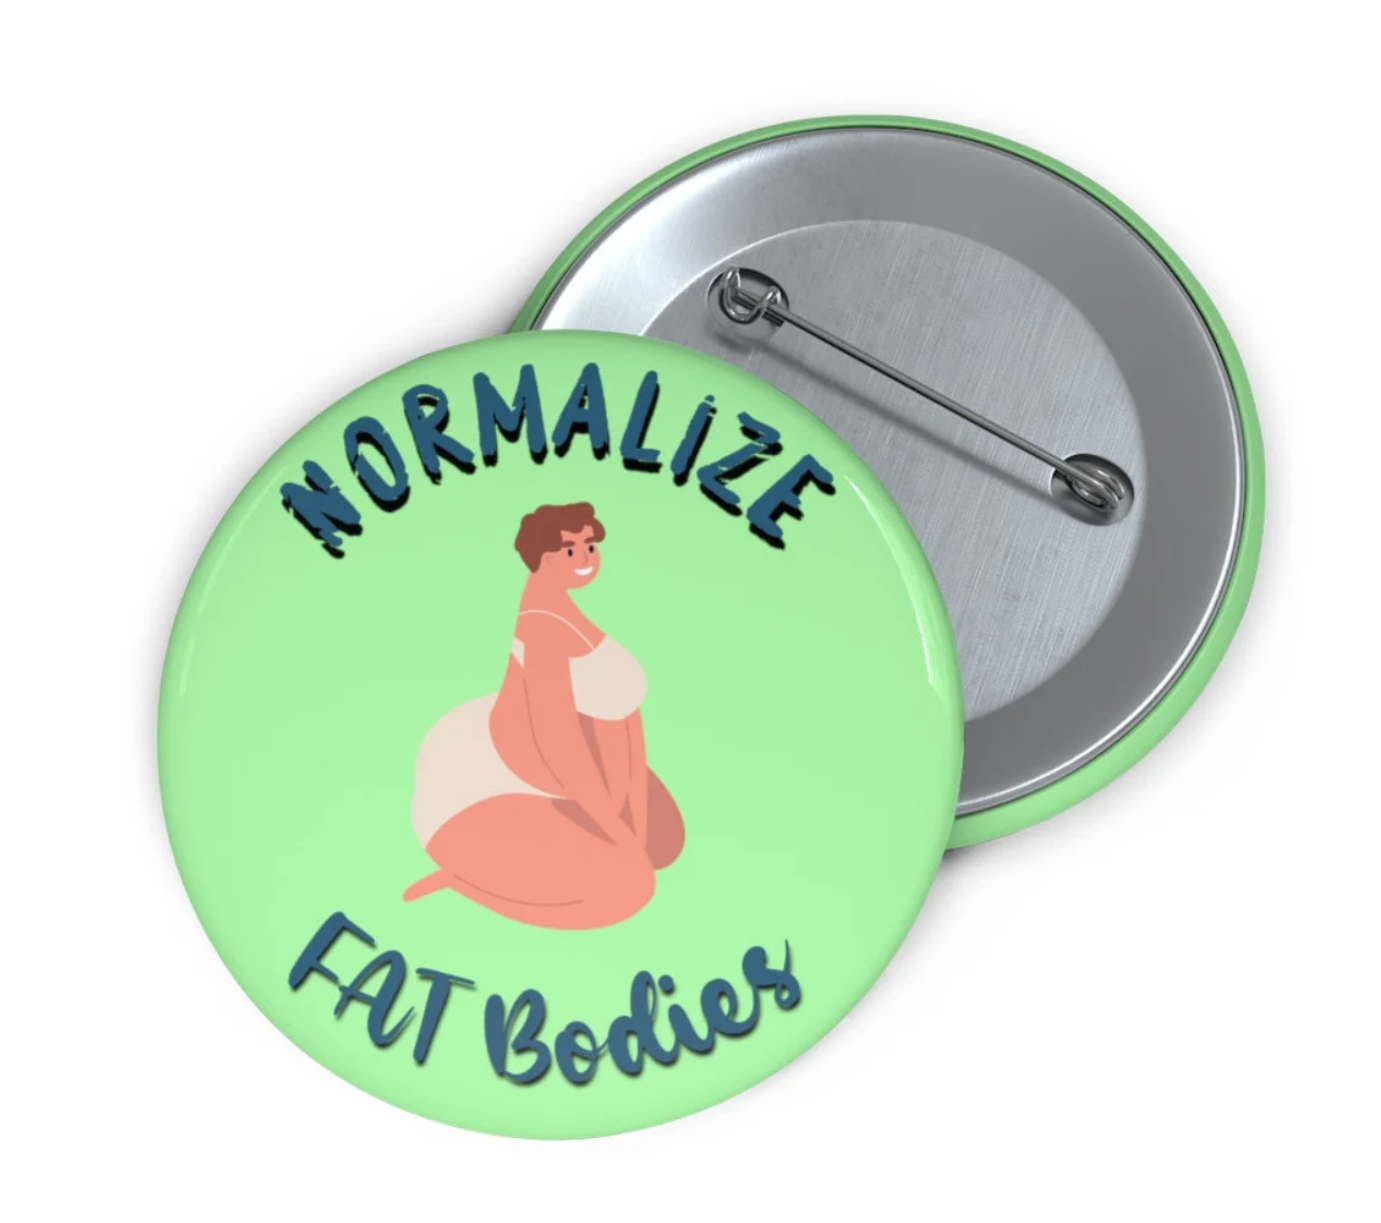 A green button or pin that says Normalize Fat Bodies and features an illustration of a fat feminine person with short hair and underwear.